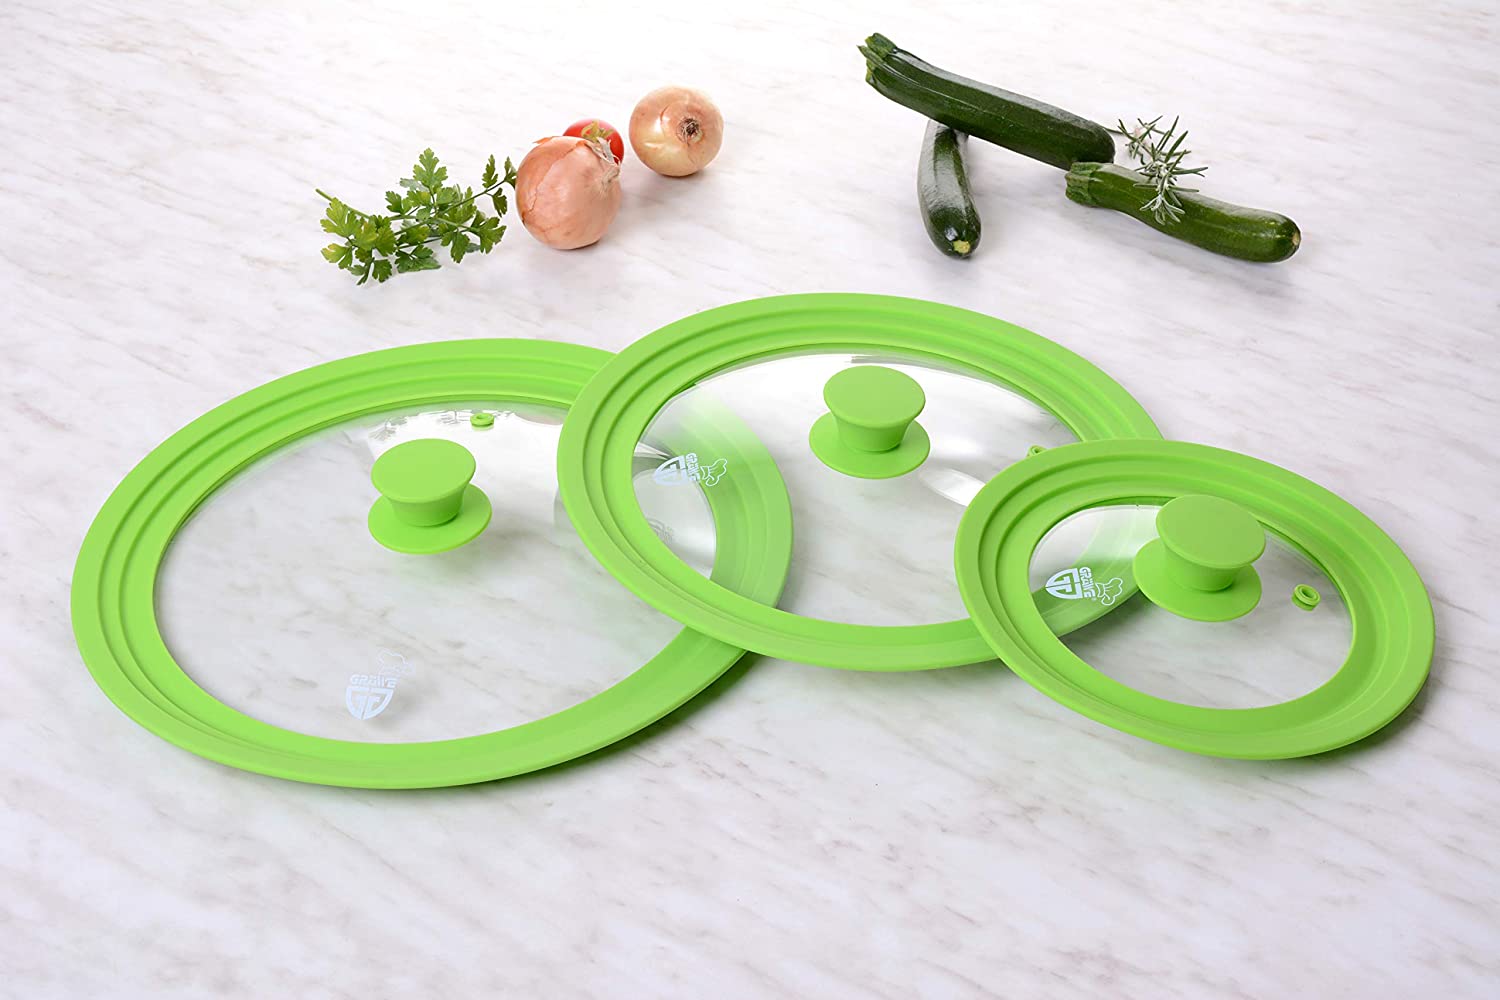 GRAWE universal lid for pans & pots Ø 24-28 cm, tempered glass lid with silicone rim, dishwasher safe - Green 24-28 cm Green